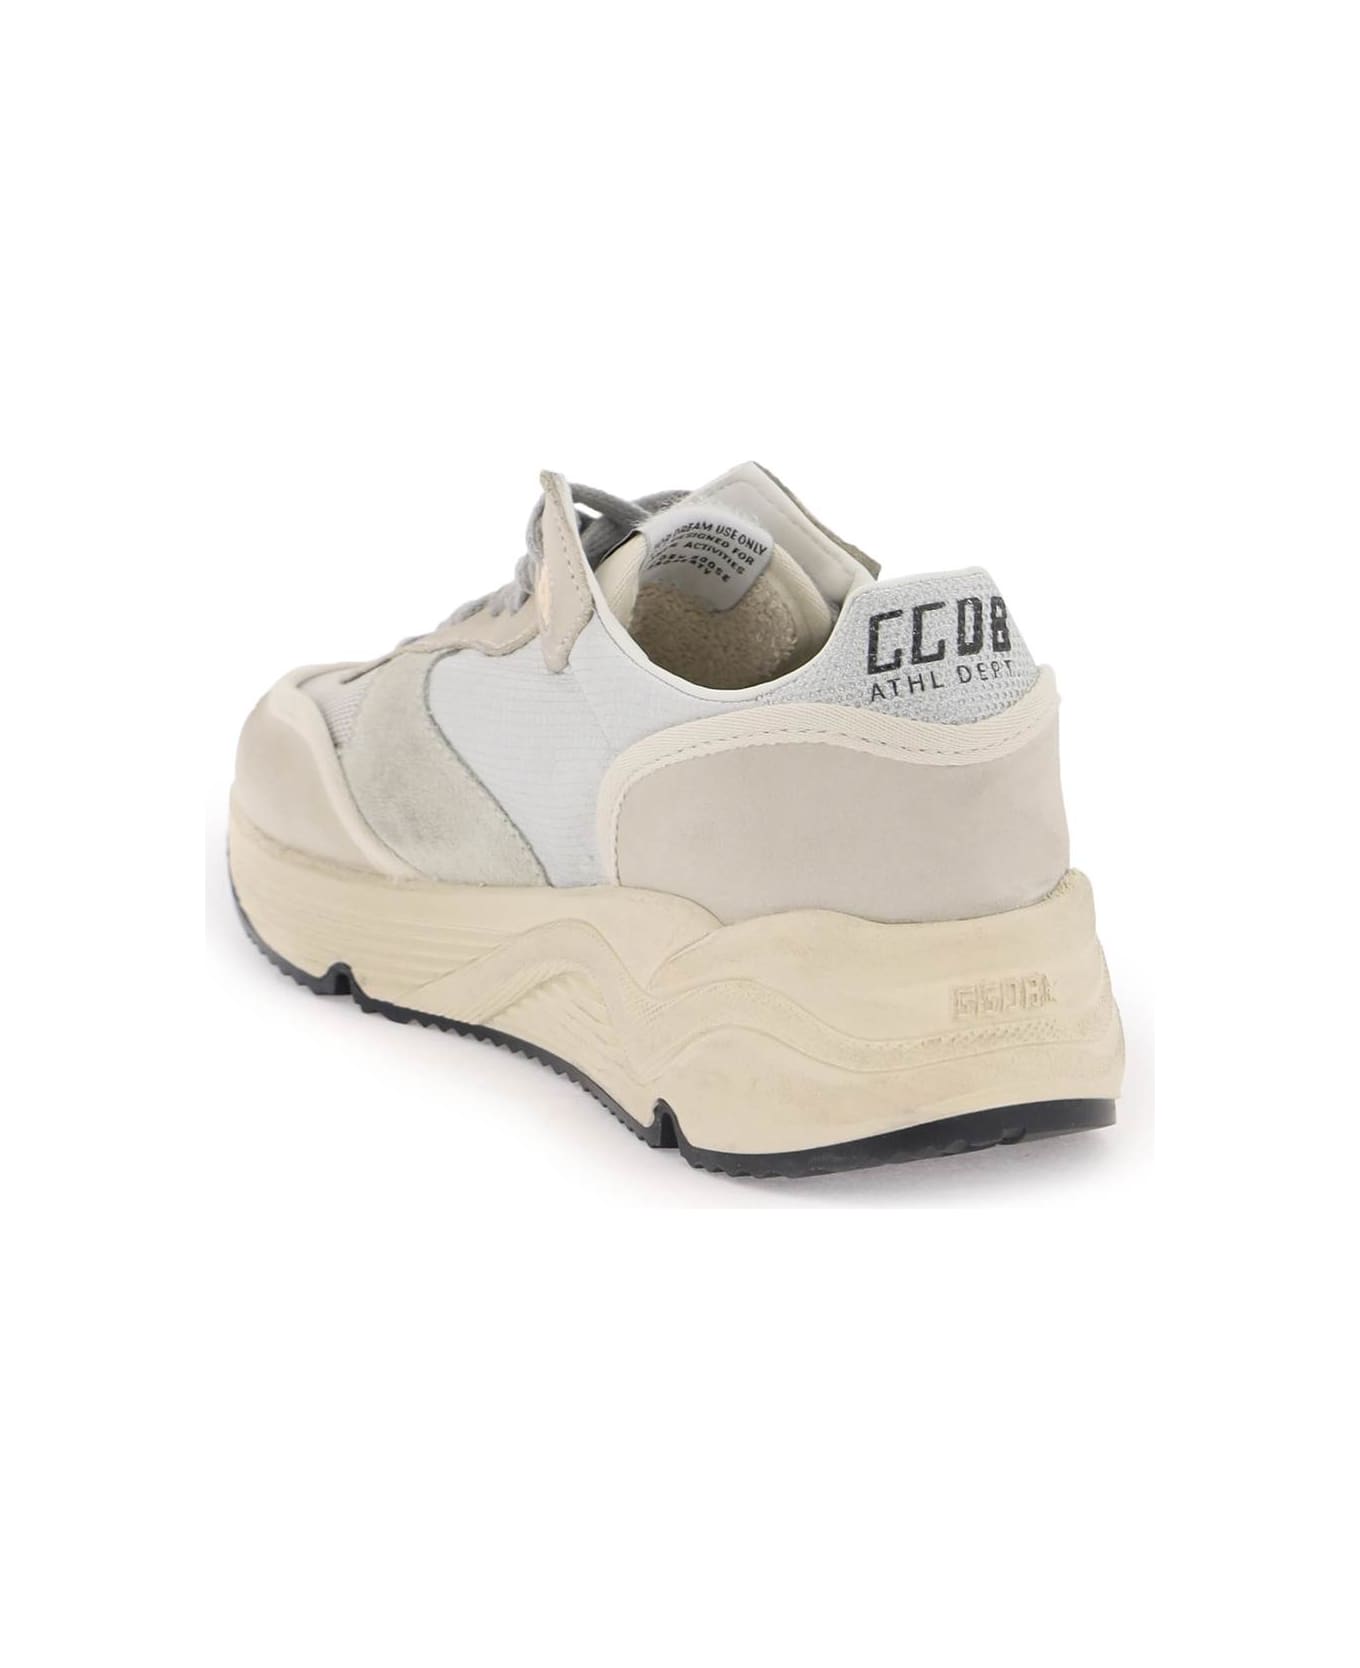 Golden Goose Running Sole Sneakers - Silver/ice/butter cream